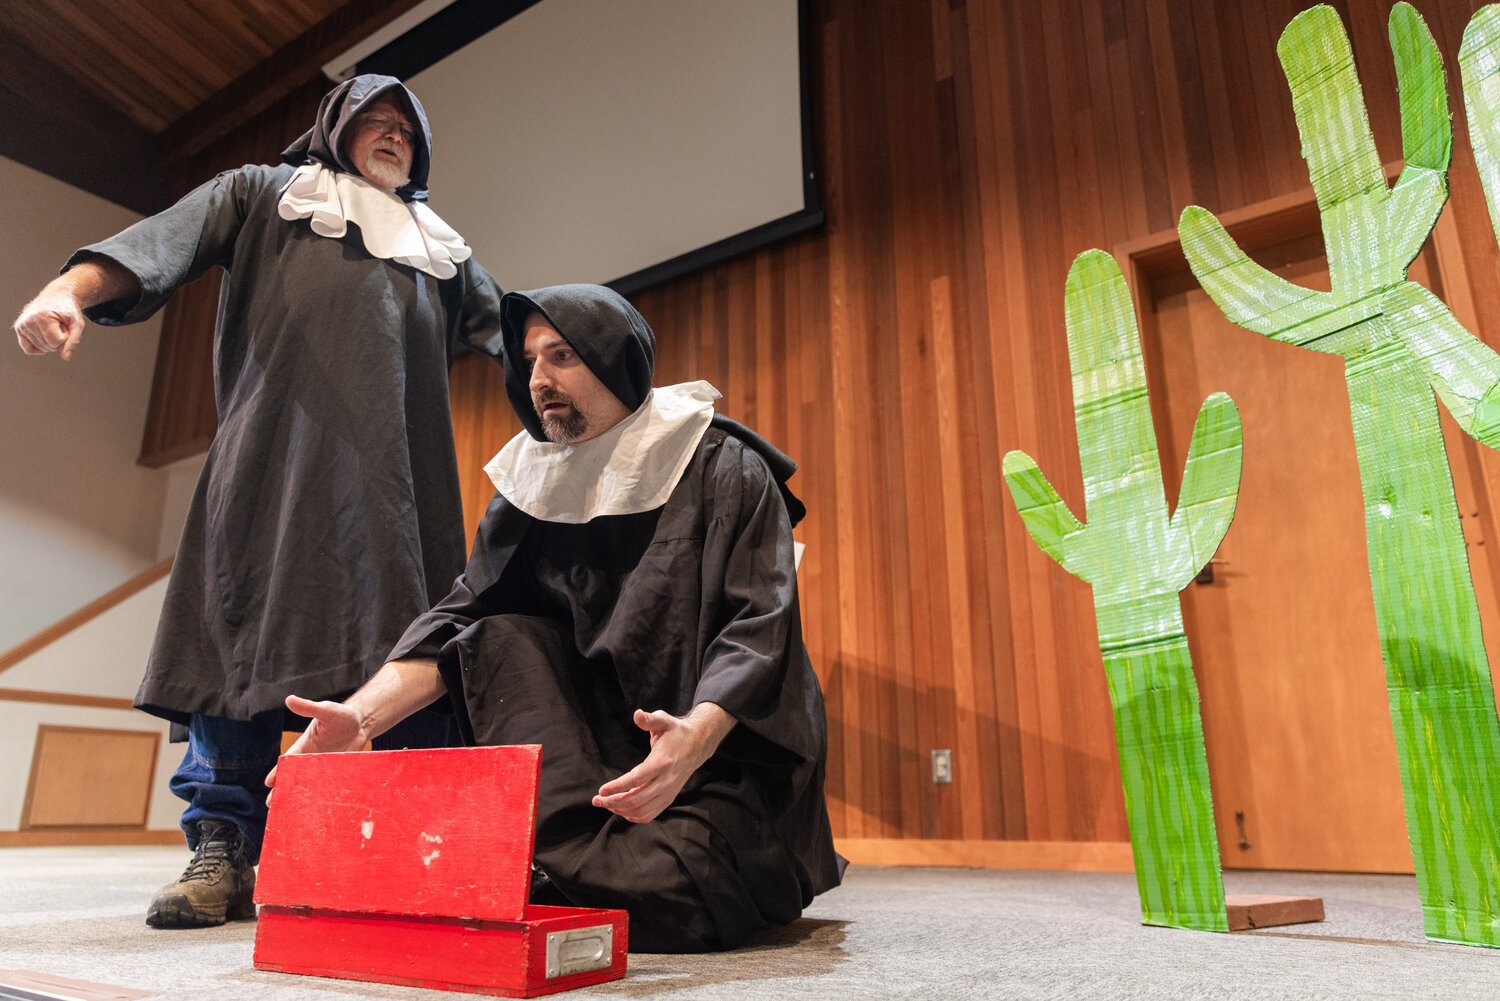 Randy Humphreys as Hector Bogonzoles and Alex Johnson as Jake Headley perform on stage during dress rehearsals for the Christmas at Rattlesnake Gulch play at Mountain View Baptist Church in Centralia.